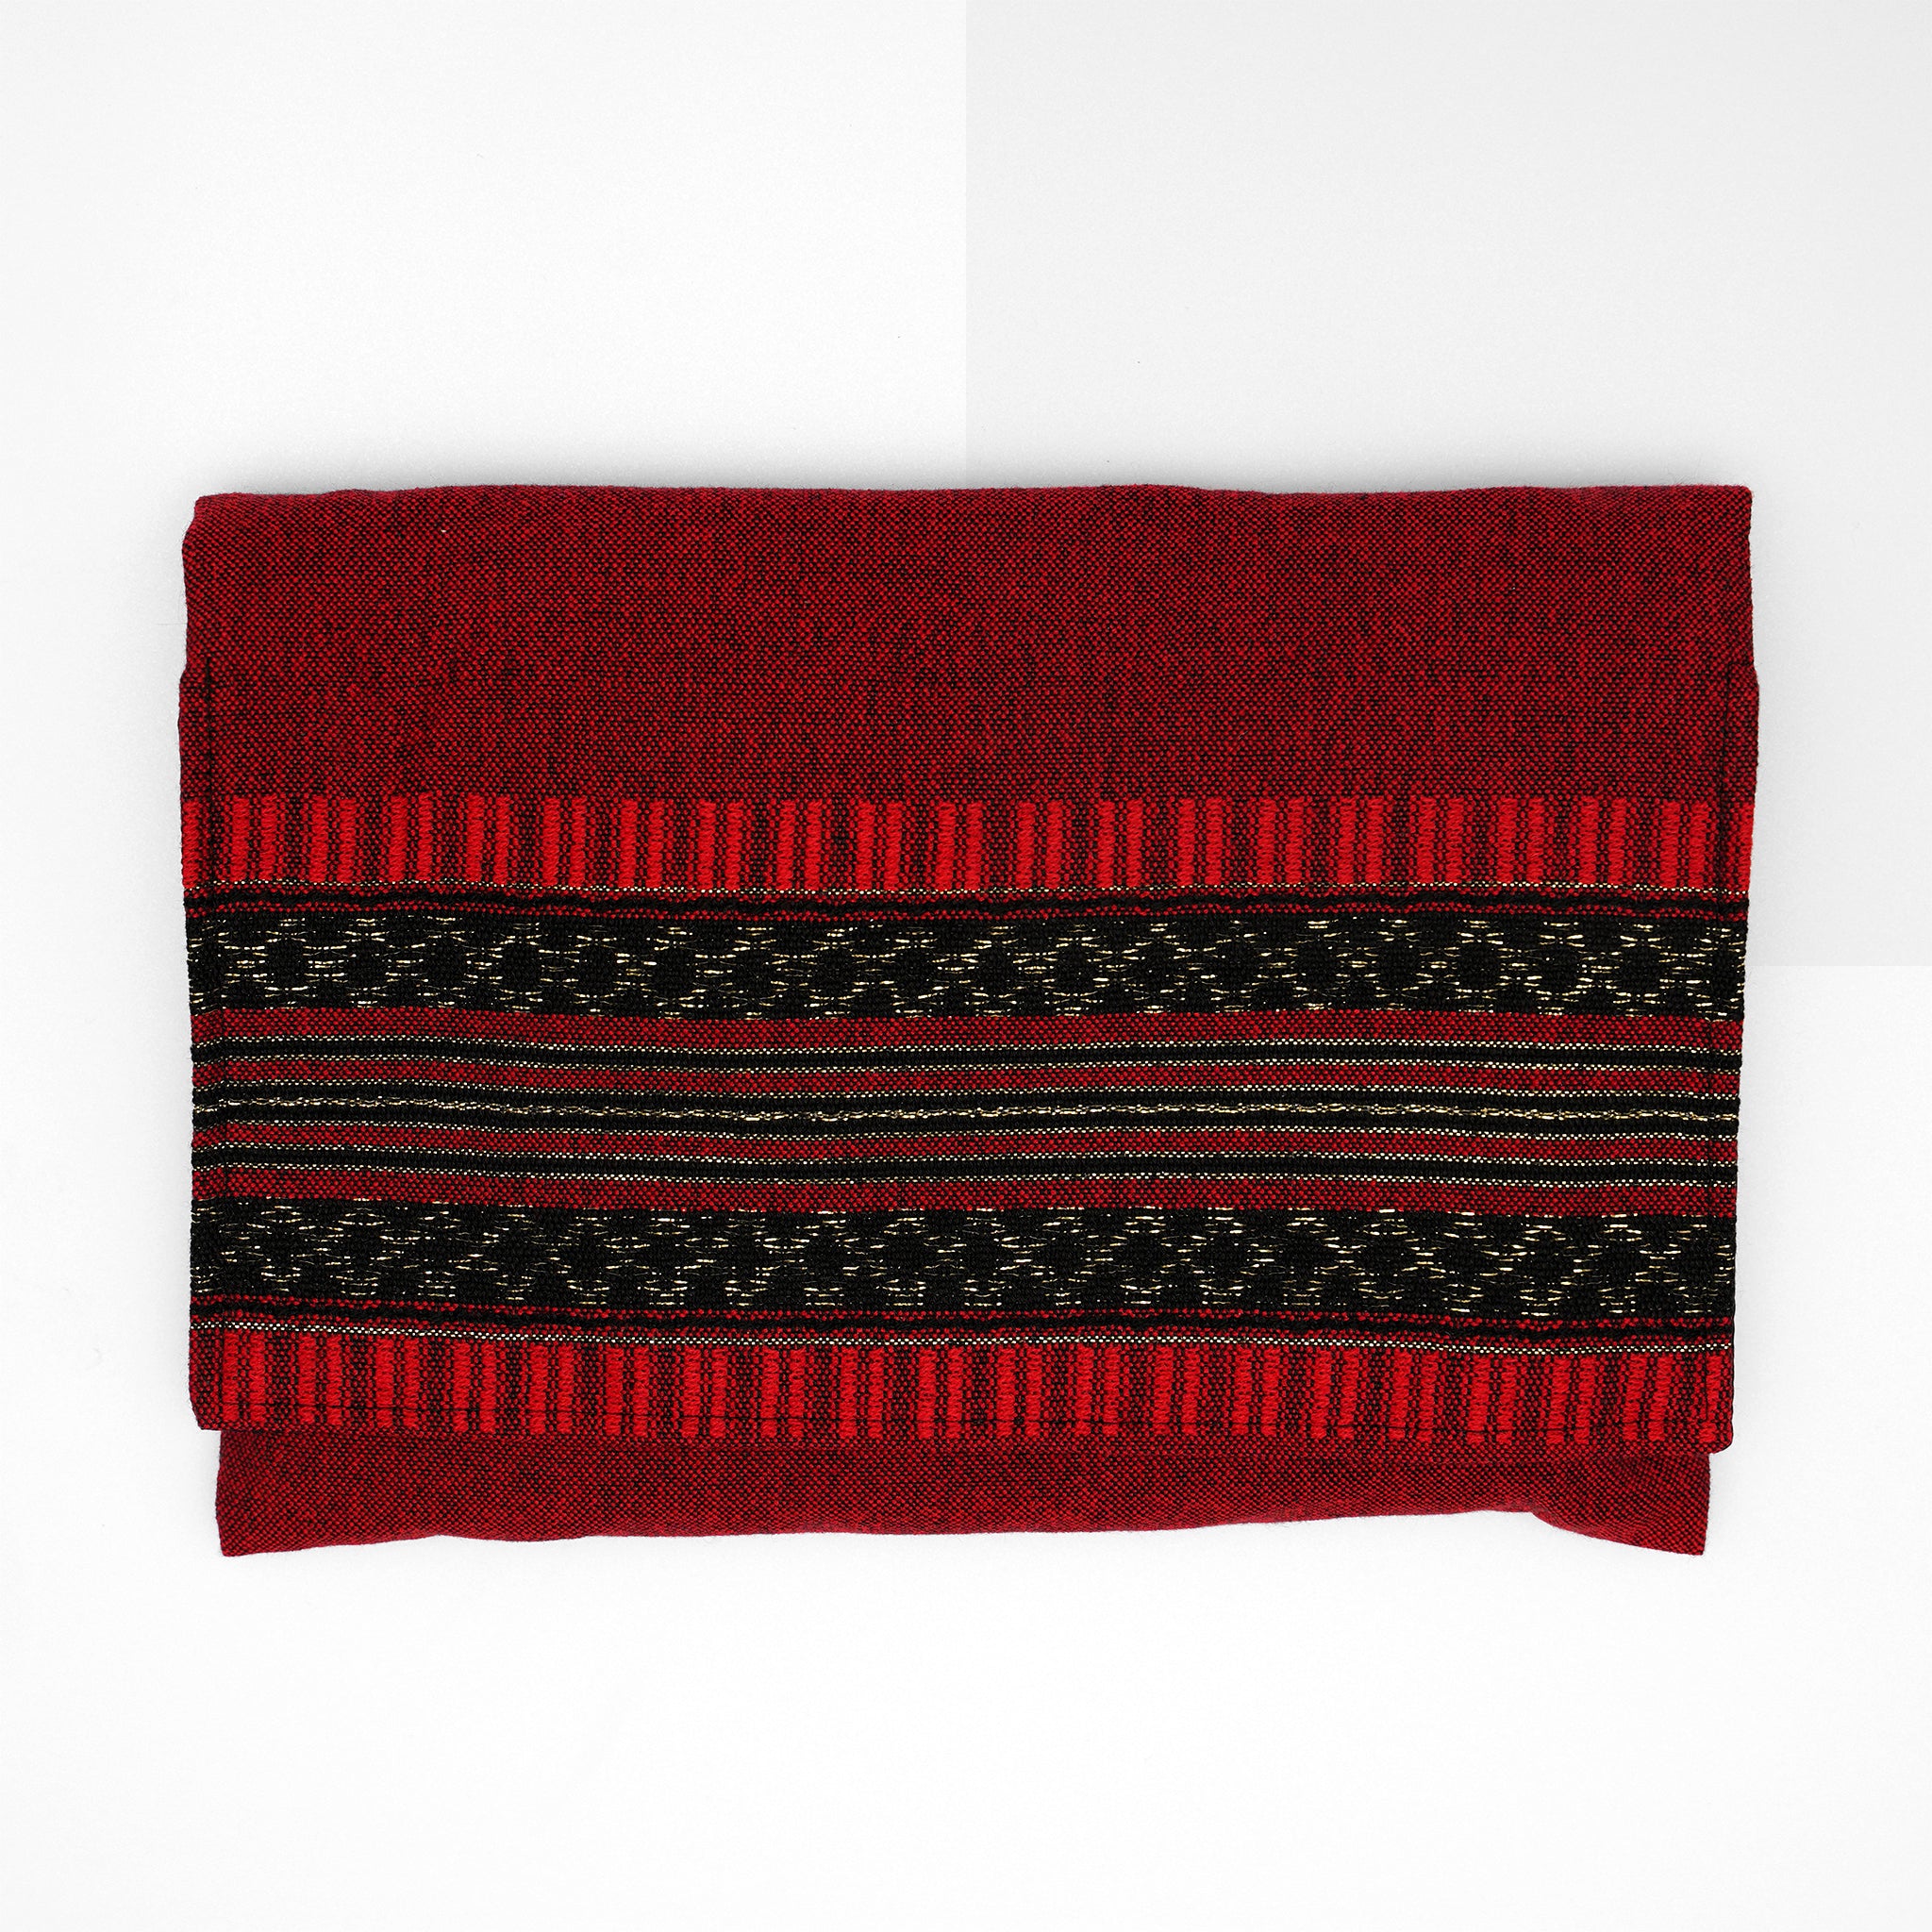 Hagar - Cotton Tallit - Black and gold on Red